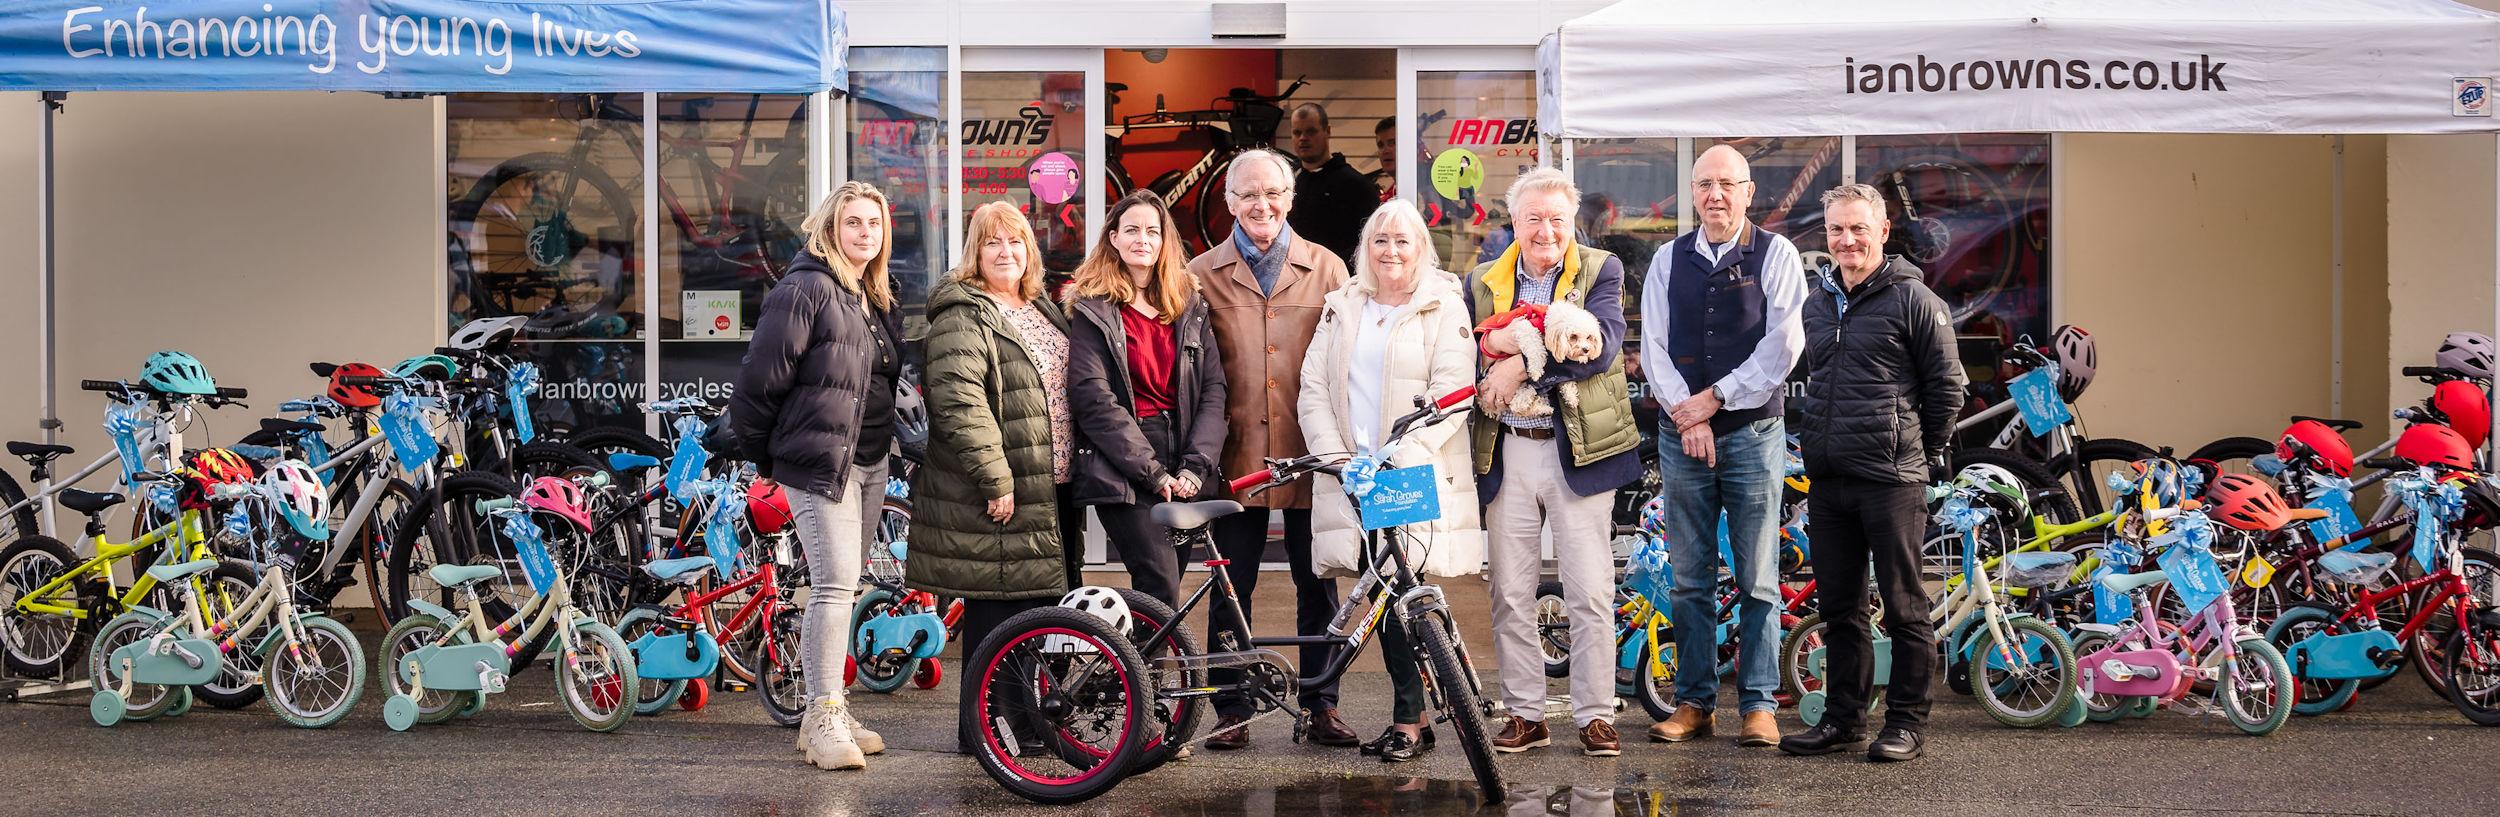 Sarah Groves Foundation bicycle donation